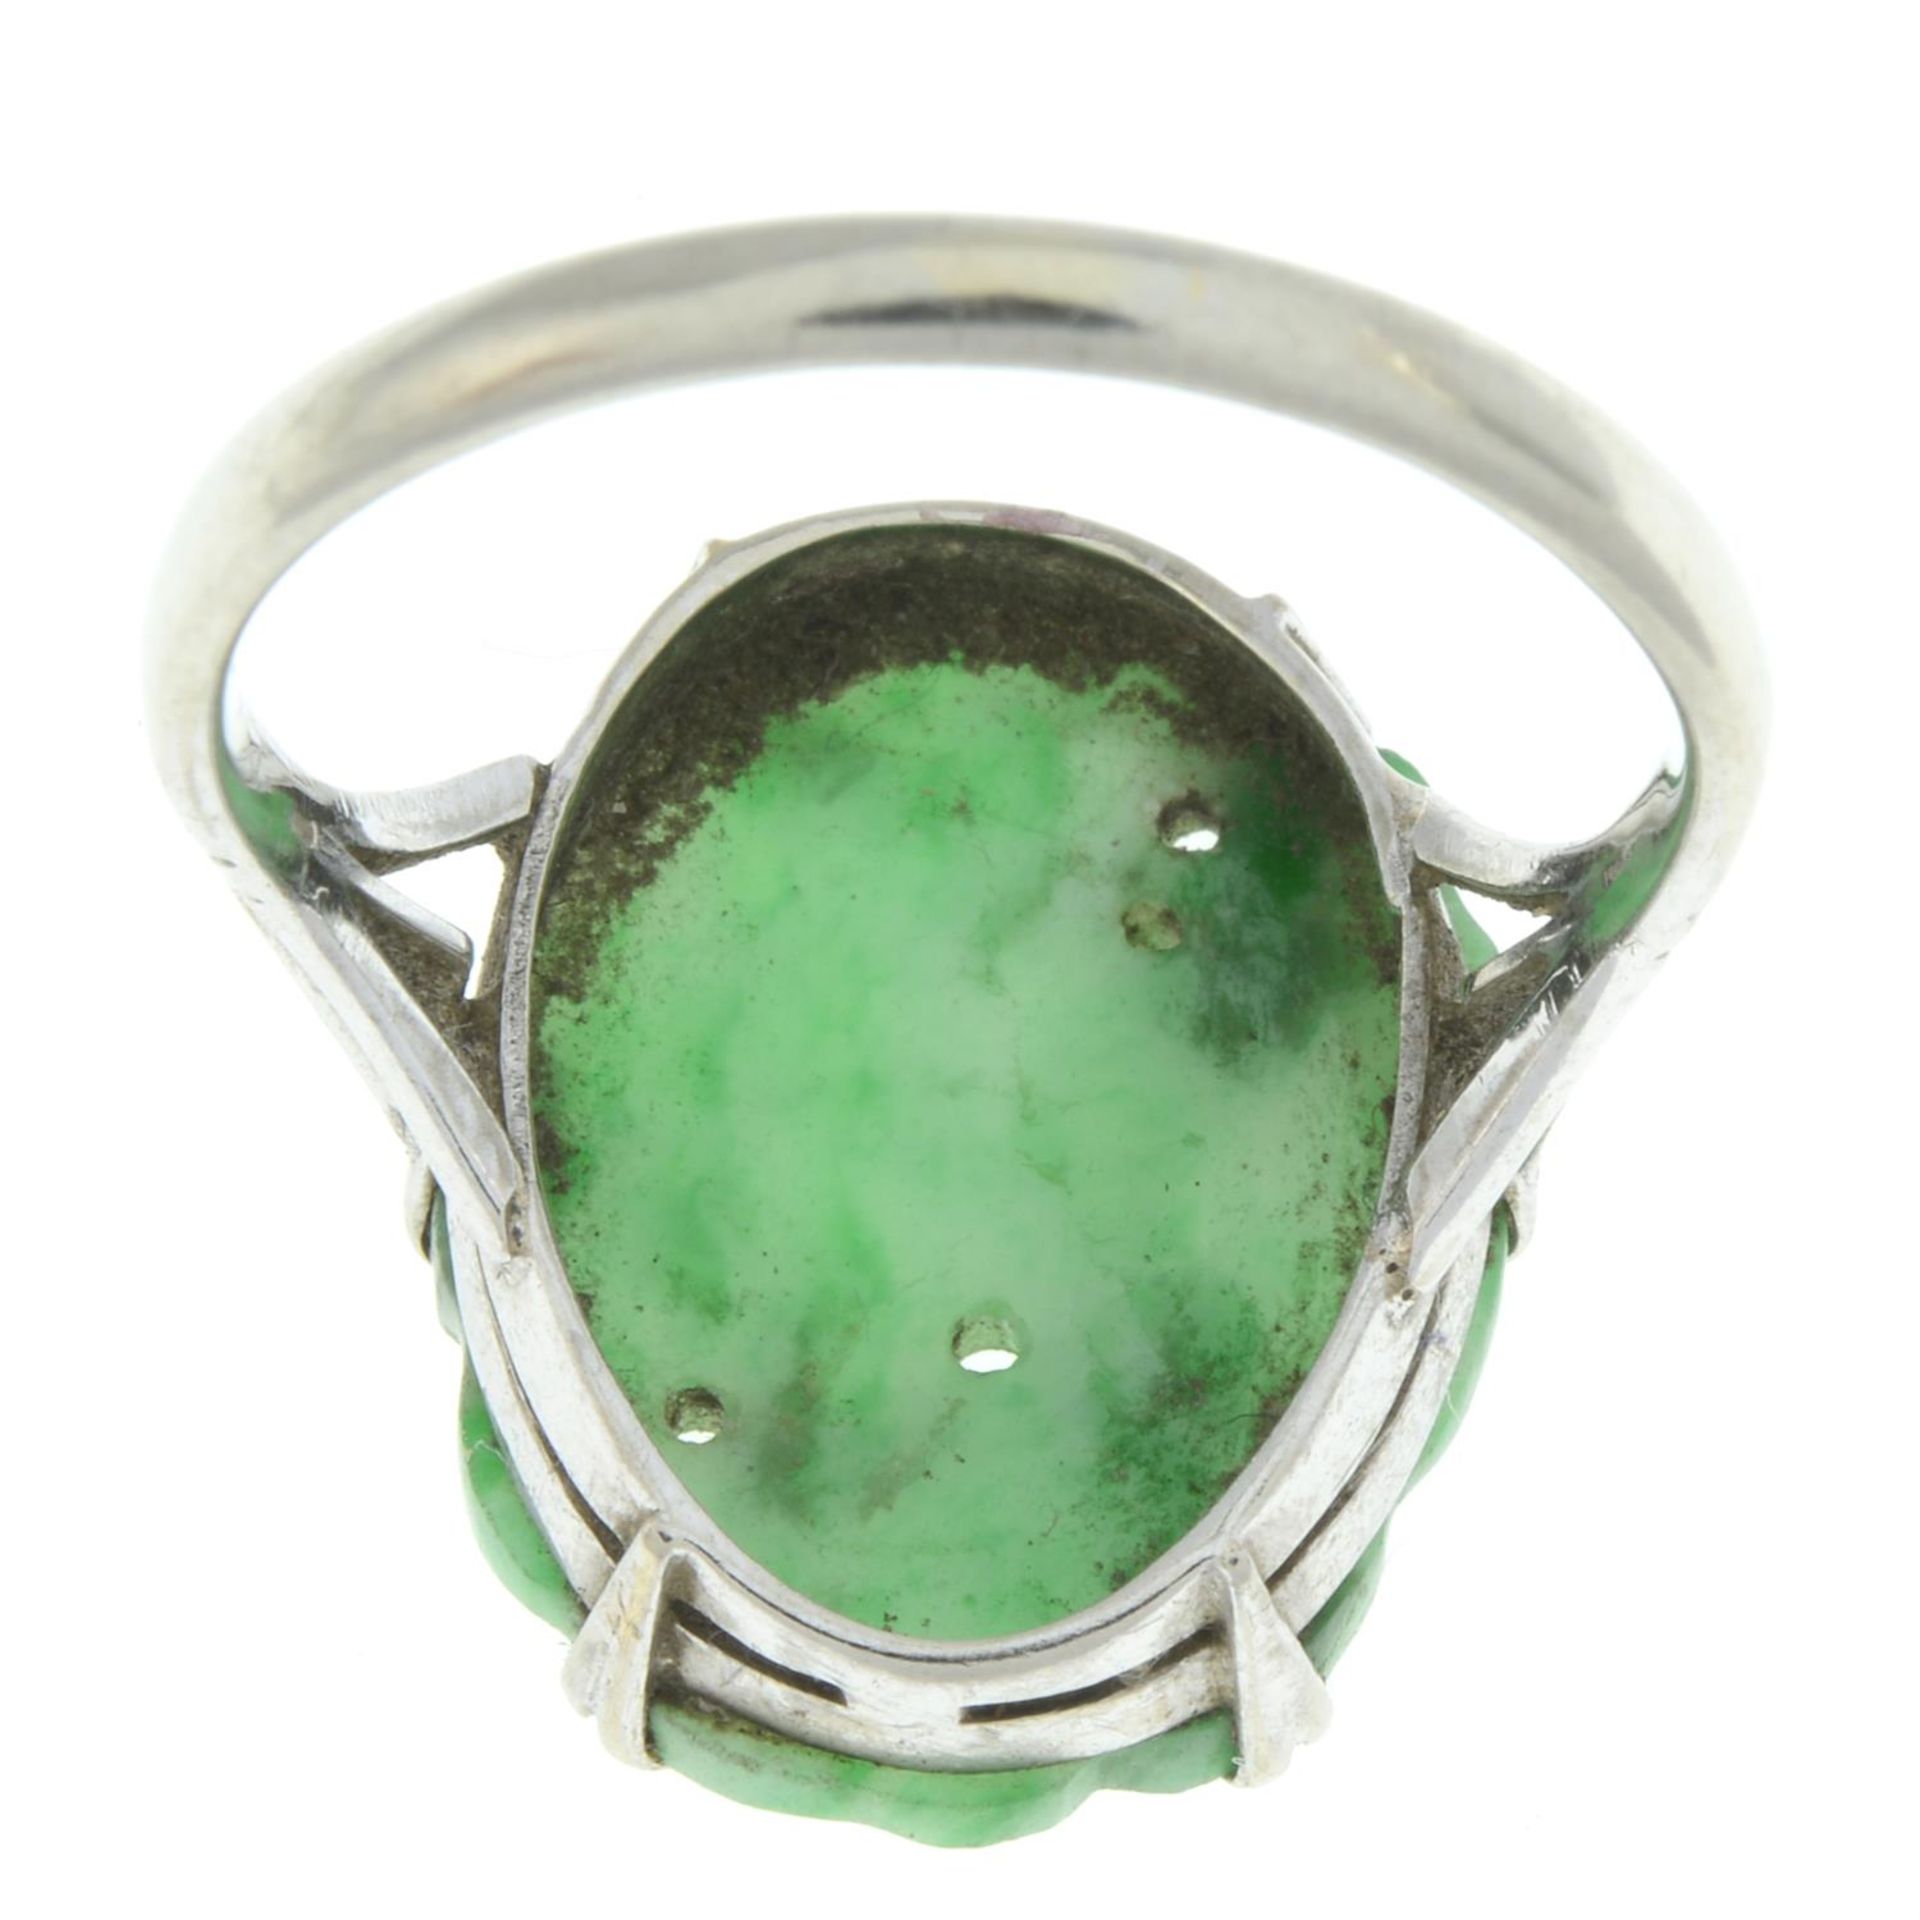 Mid 20th century 9ct gold carved jade ring - Image 2 of 2